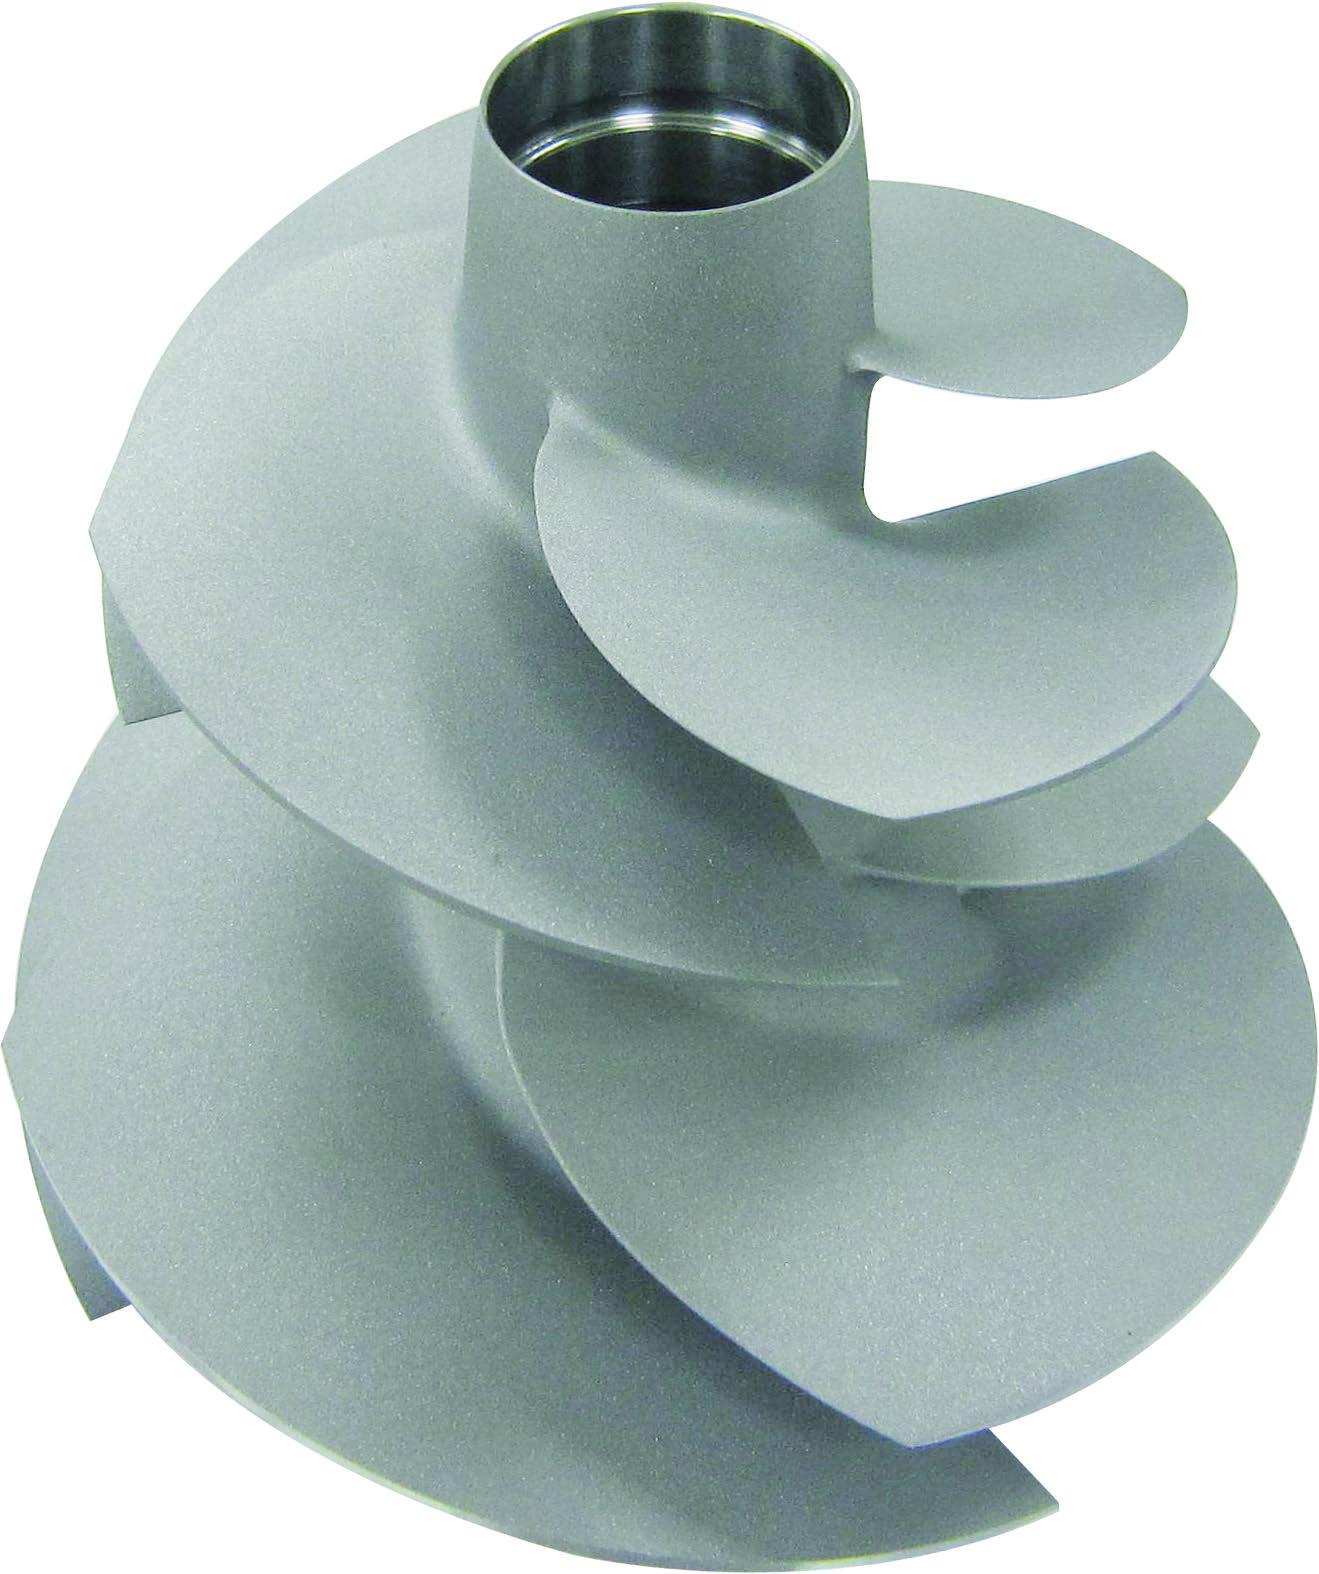 Twin Fly Impeller 09/14 - For 16-17 Sea-Doo GTX RXPX RXTX 300 - Click Image to Close